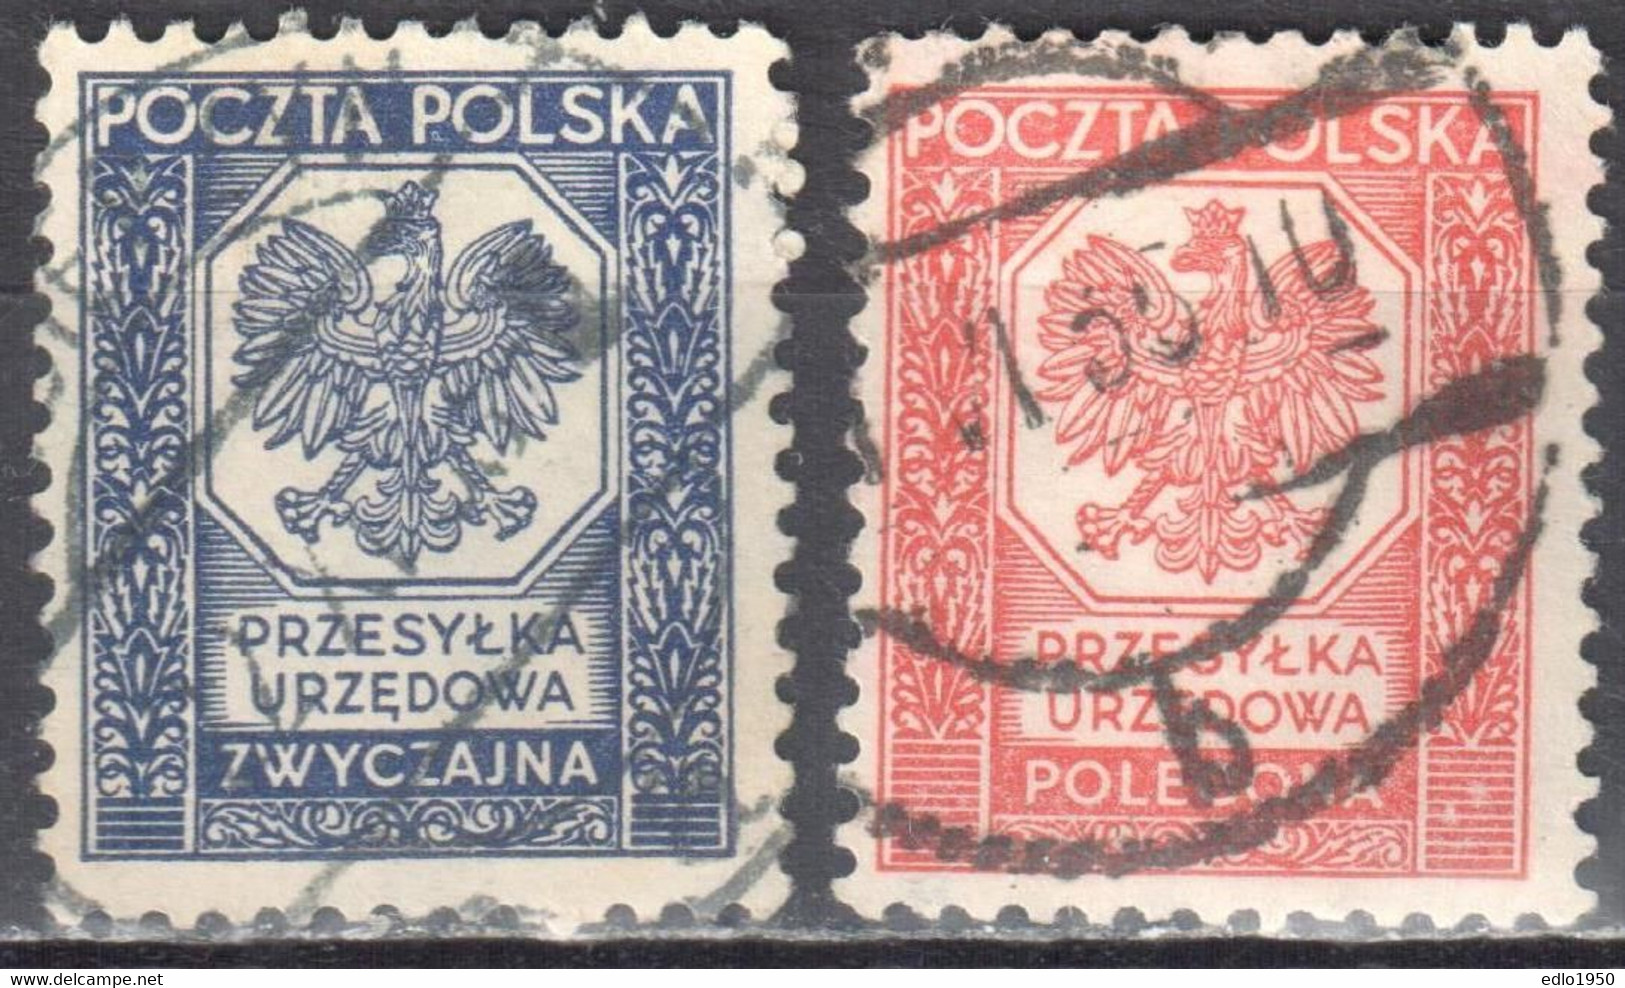 Poland 1935 Official Stamps - Mi.19-20 - Used - Service